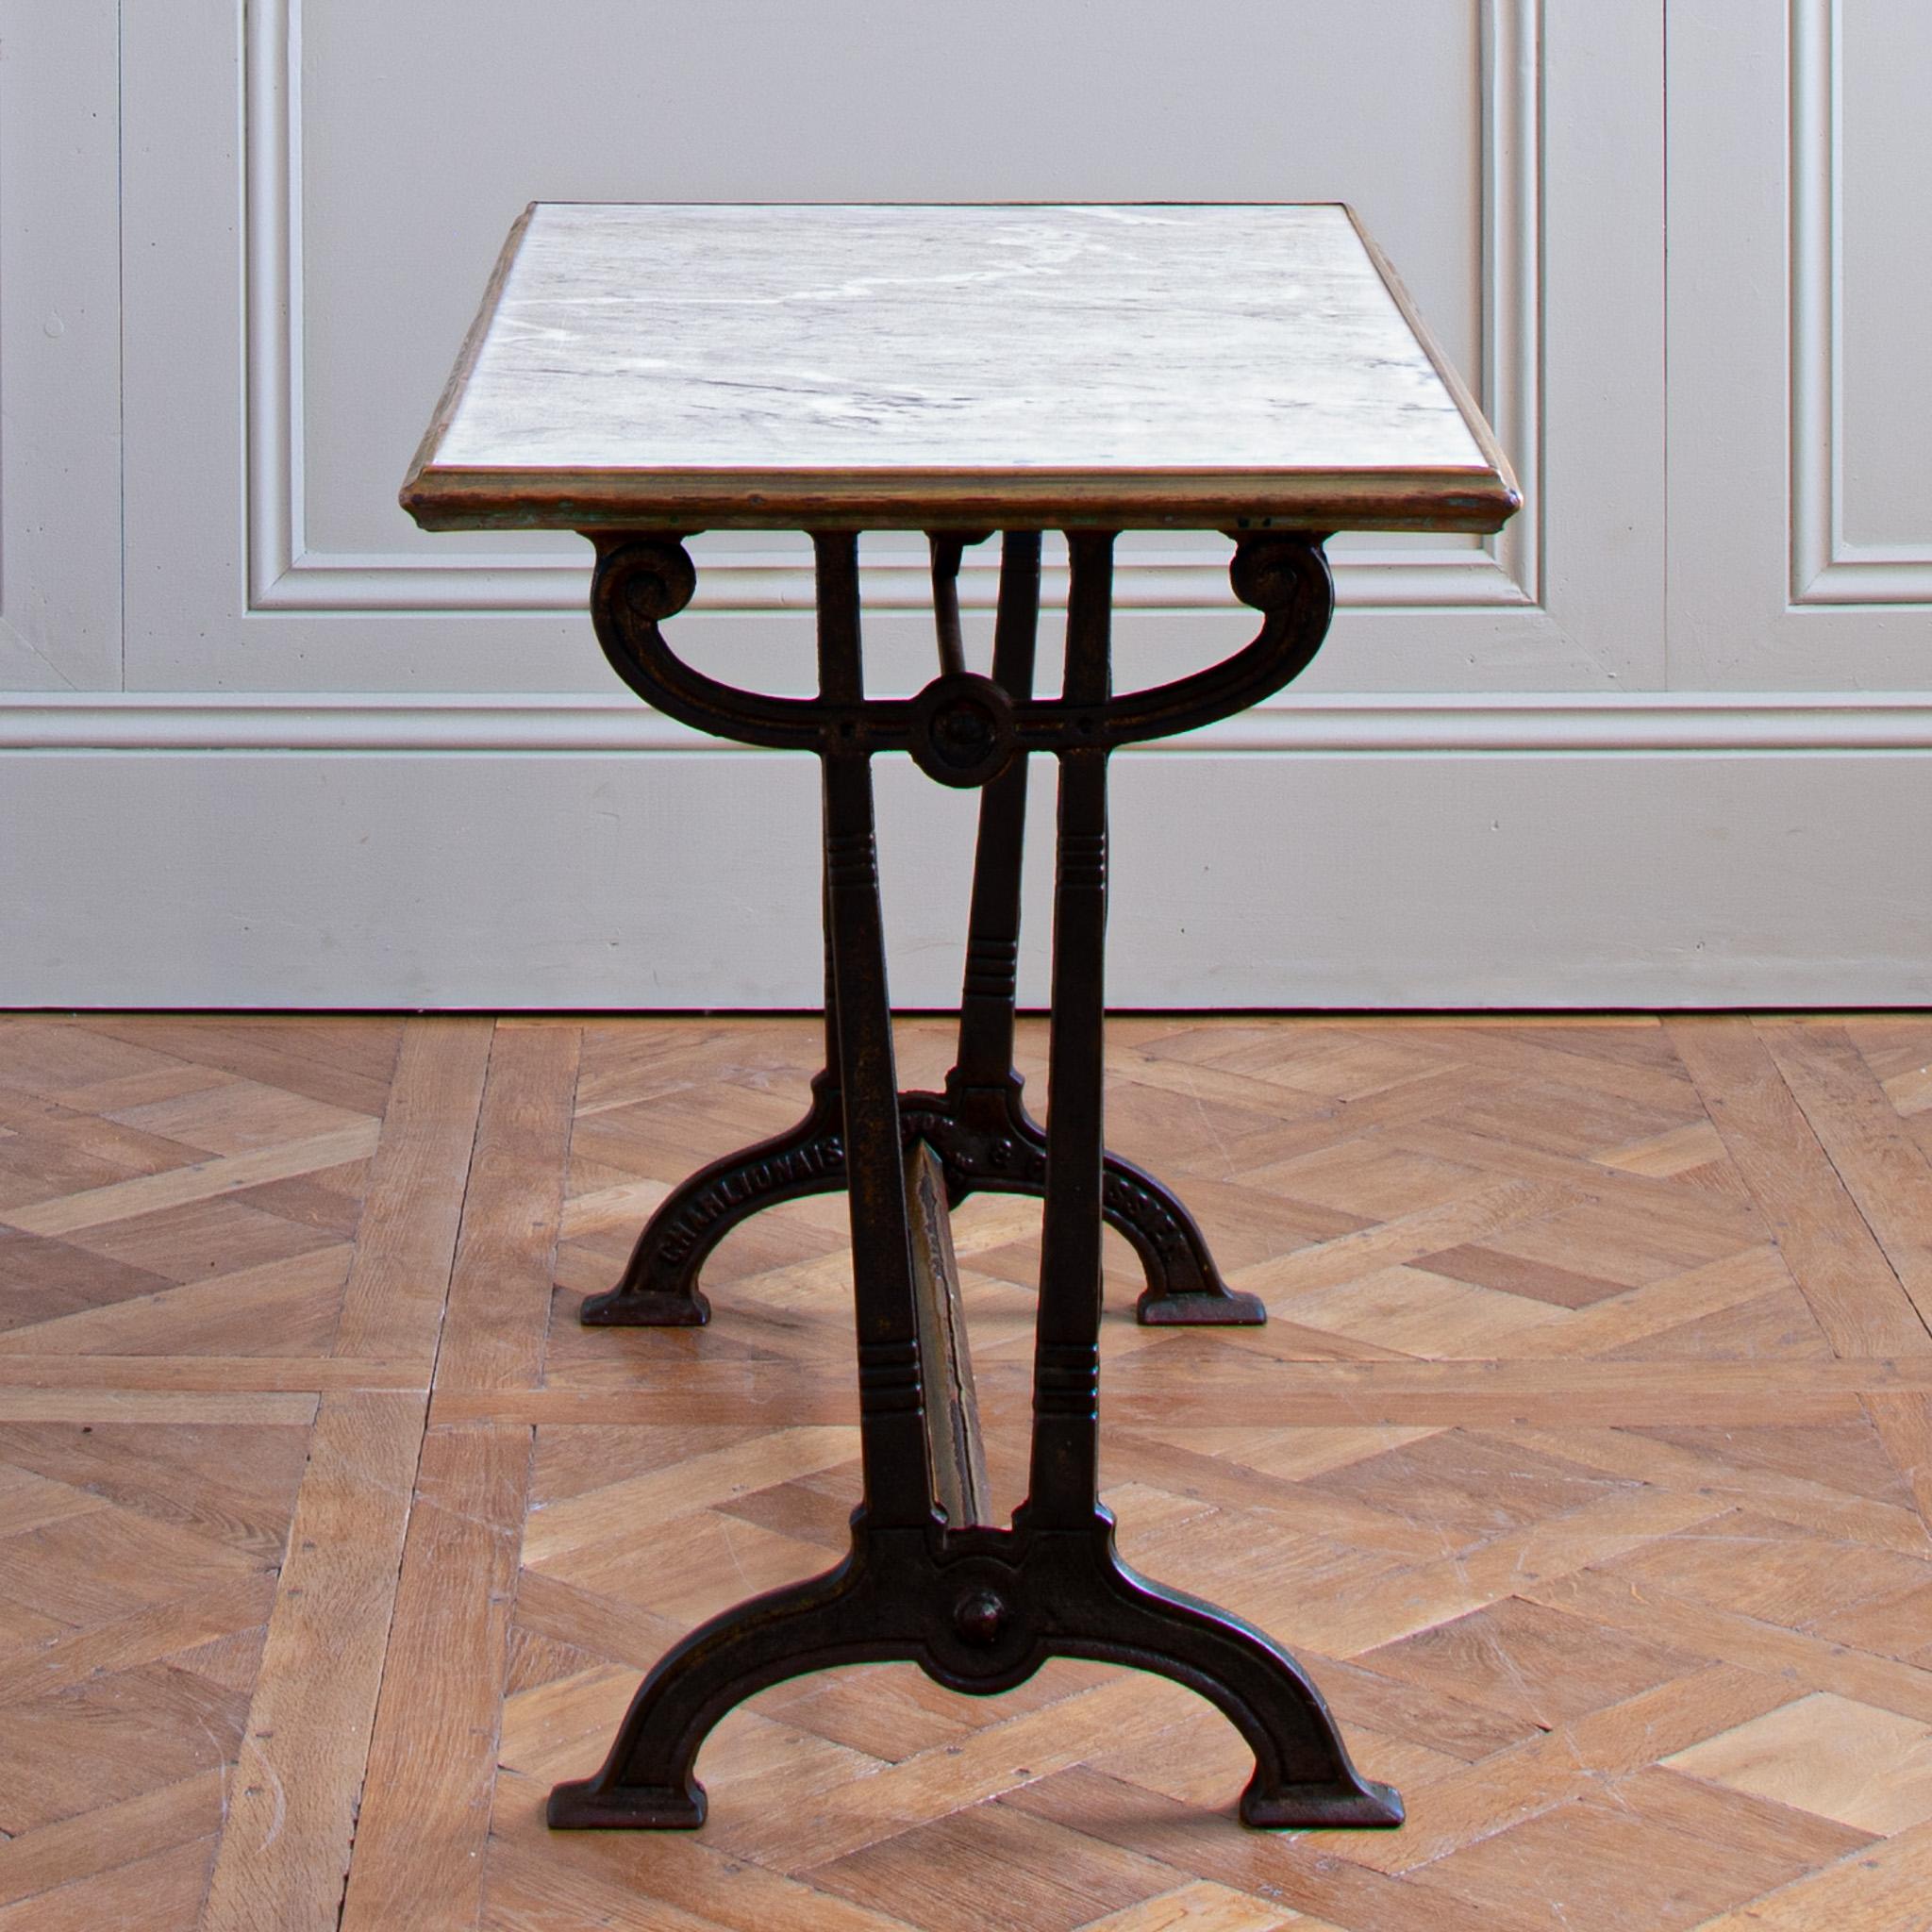 20th Century Art nouveau French Bistro Table Circa 1900 by Charlionais & Panassier For Sale